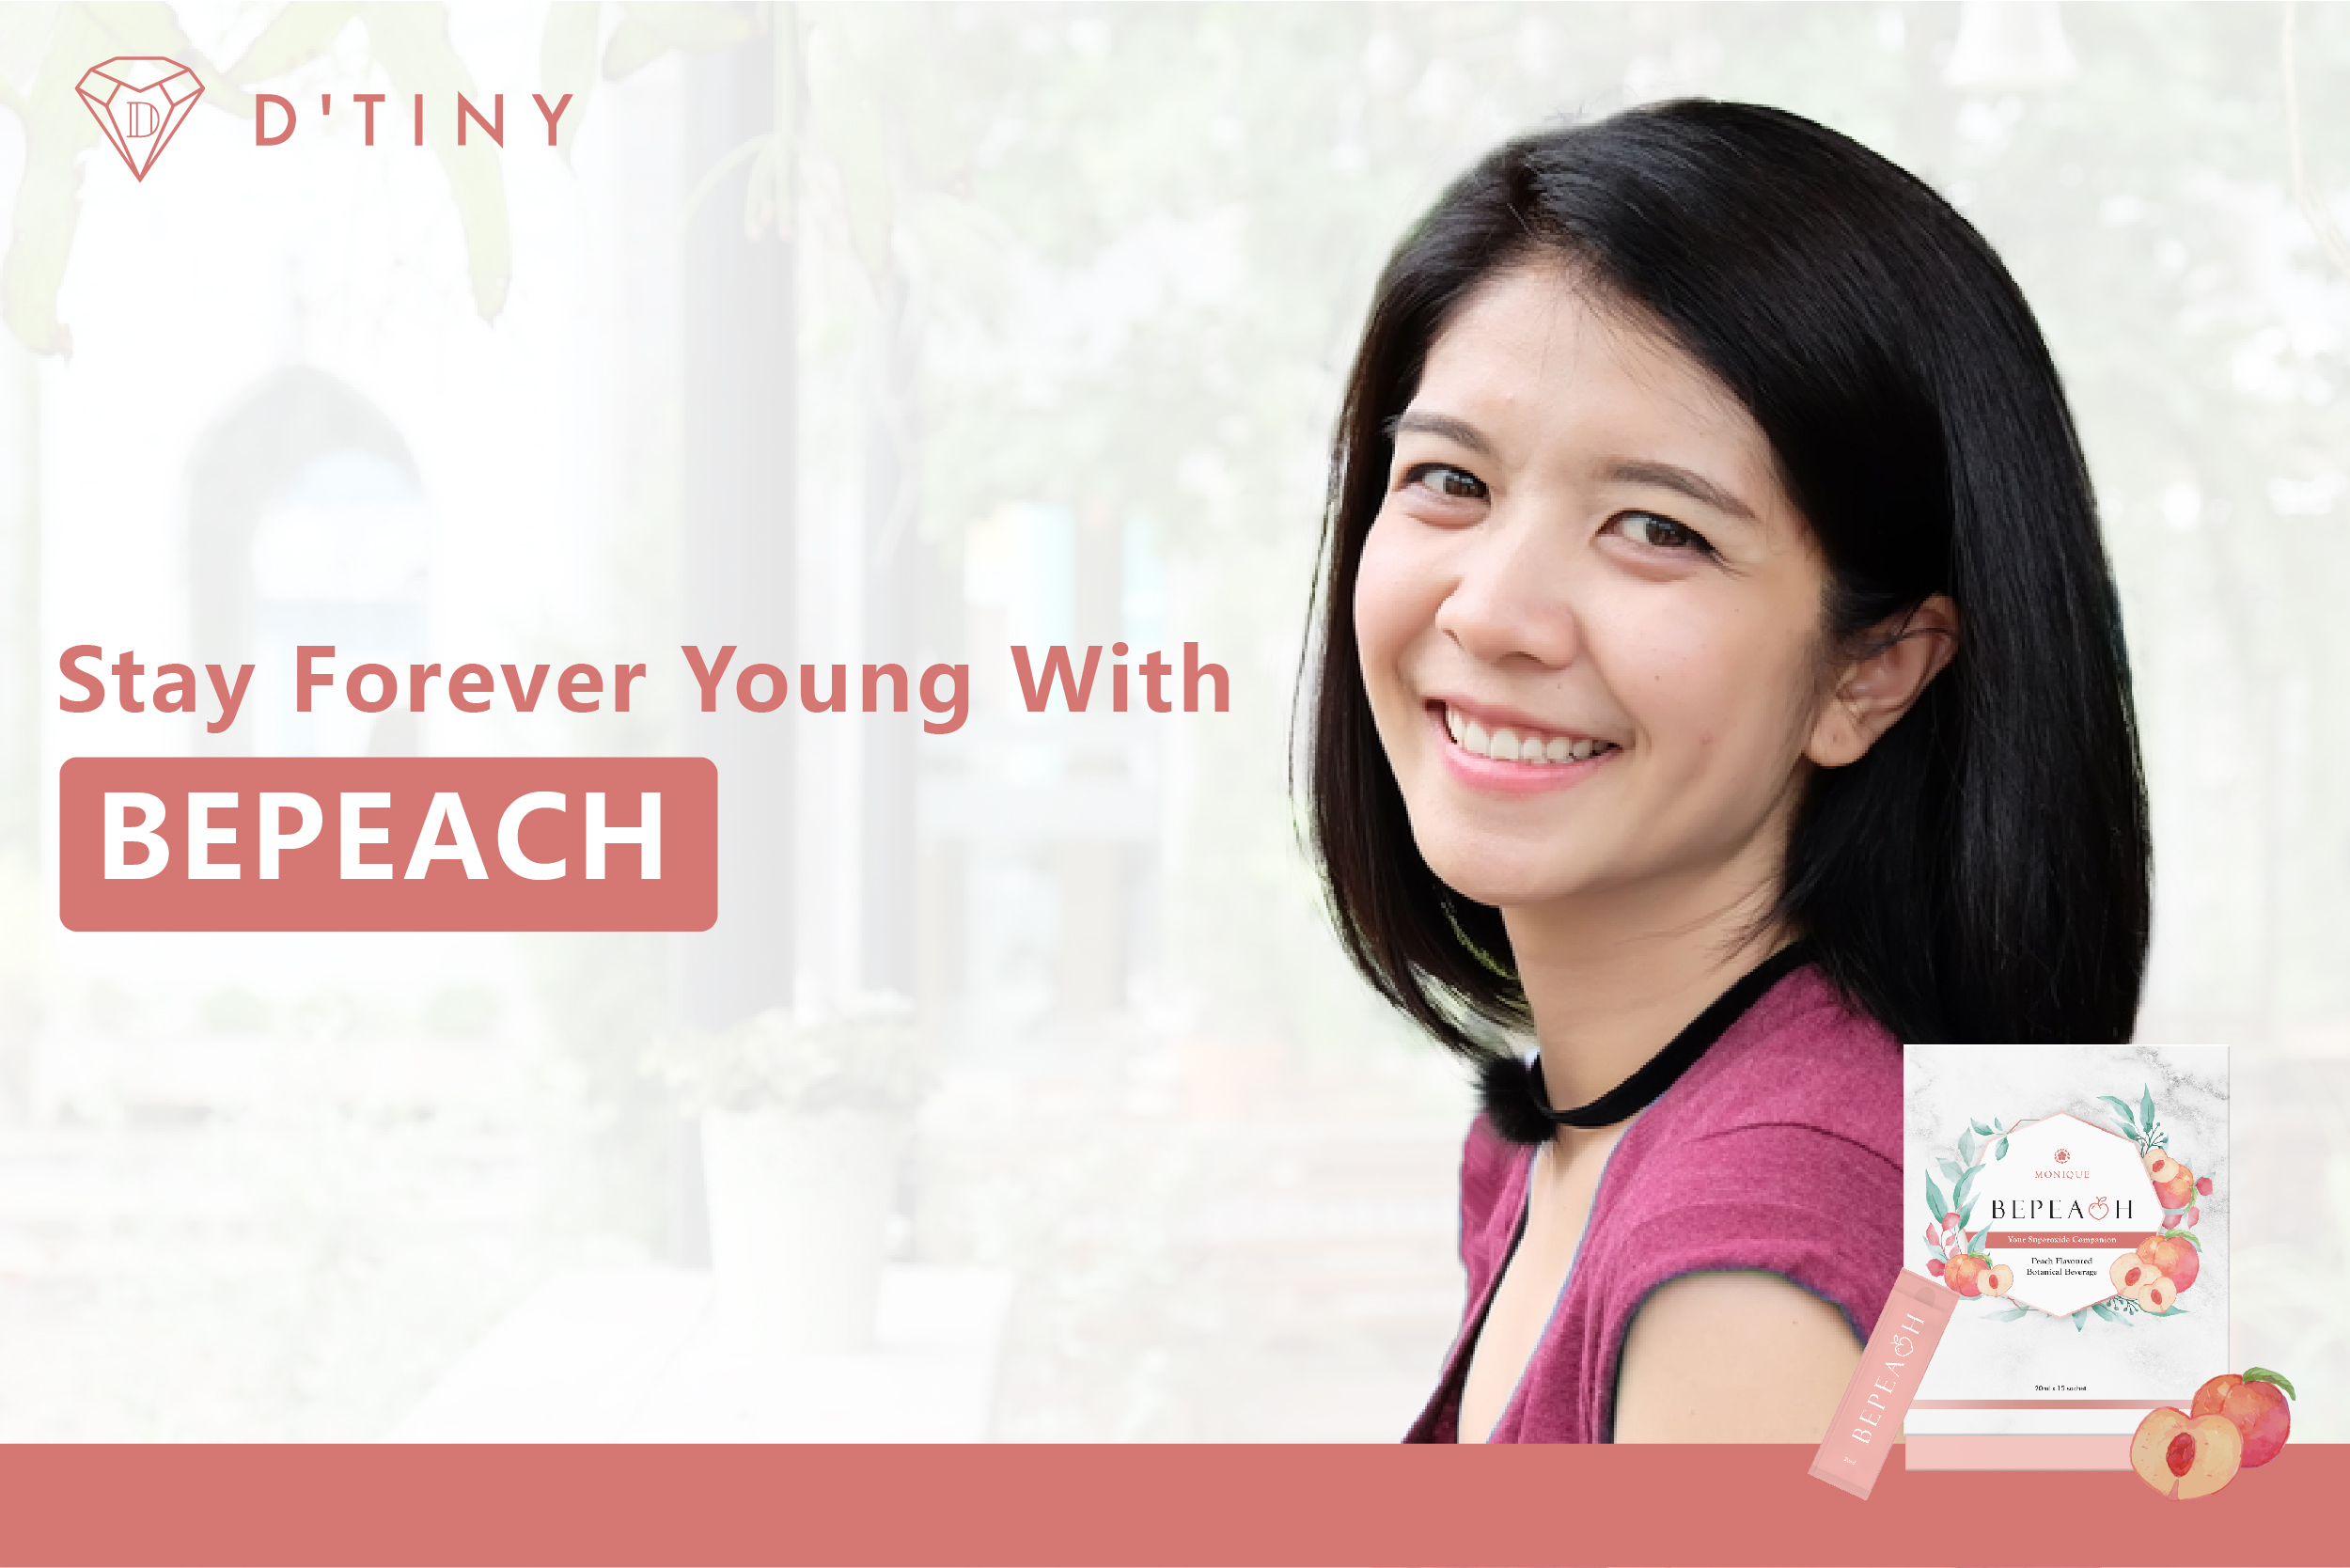 Stay Forever Young With BEPEACH